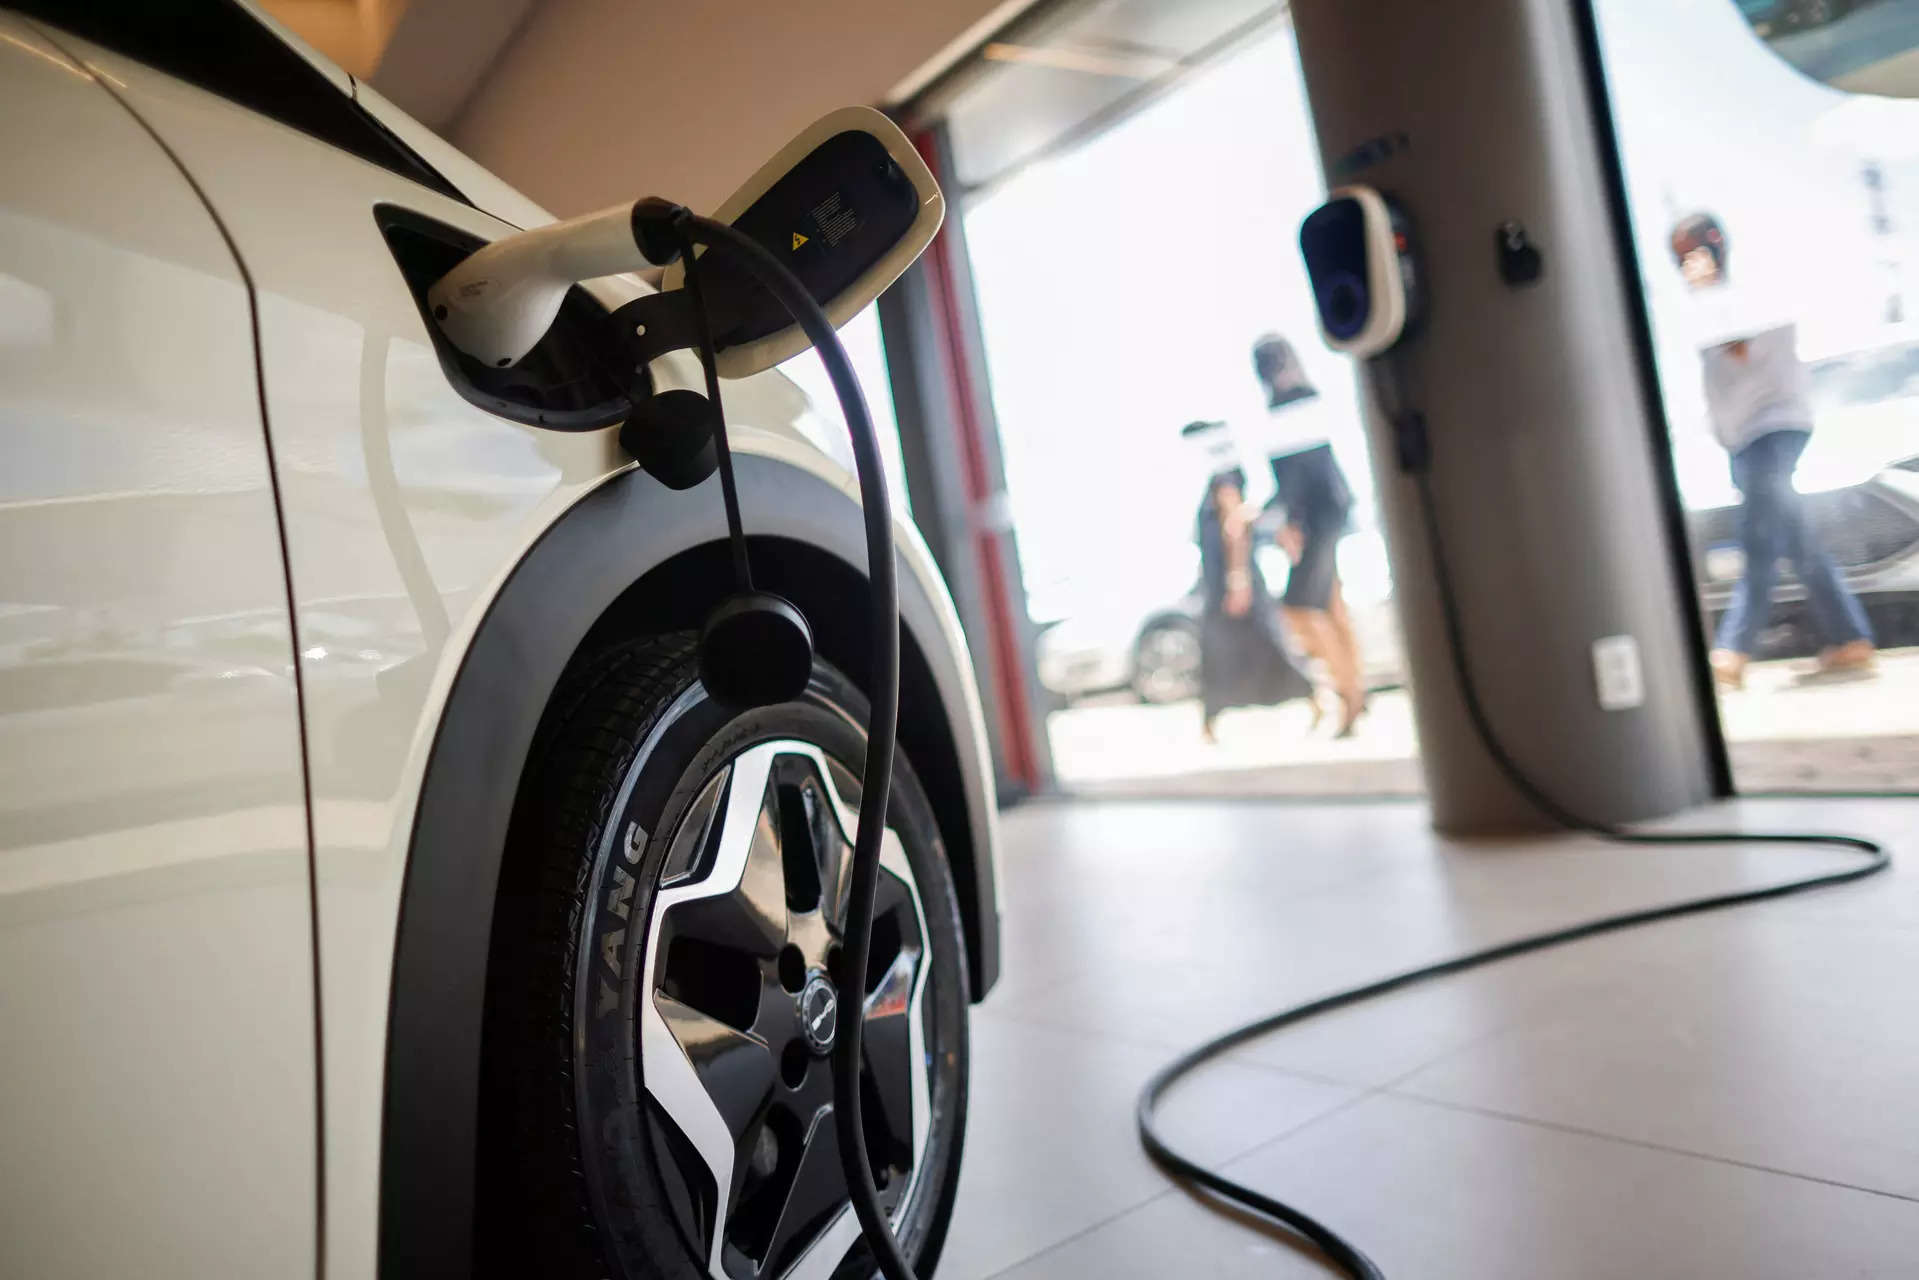 <p>As per the EAC-PM, the number of EVs as a percentage of total vehicles in the country stood at 0.21% while EV four-wheelers as a percentage of the total four wheelers amounted to only 0.08%.<br /></p>